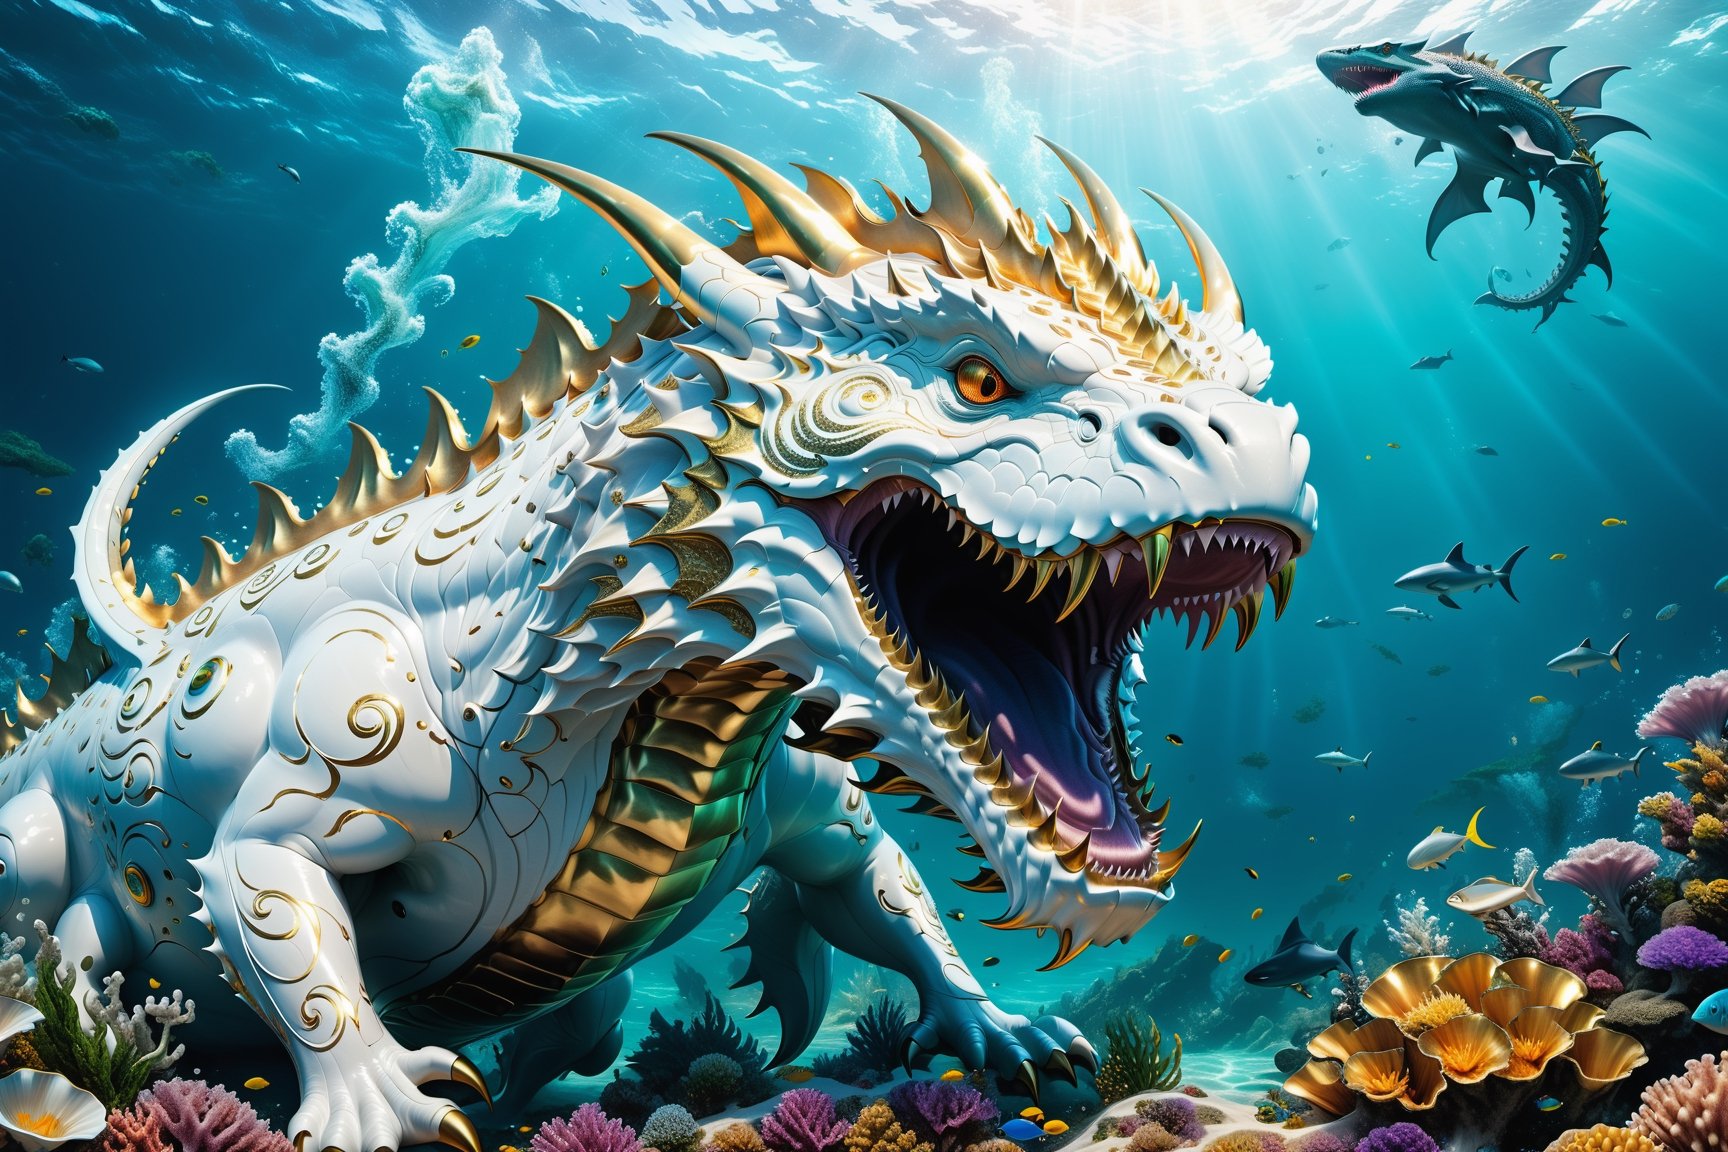 High definition photorealistic render of an incredible and mysterious futuristic mythical creating creature inusual big with giant dragon-shaped morza with many eyes in splosion monster with parametric shape and structure in the word, curved and fluid shapes in a on the seabed, with fish sharks marine life, aquatic plants, seabeds, shells and bubble explosion, in white marble with intricate gold details, luxurious details and parametric architectural style in marble and metal, epic pose
​